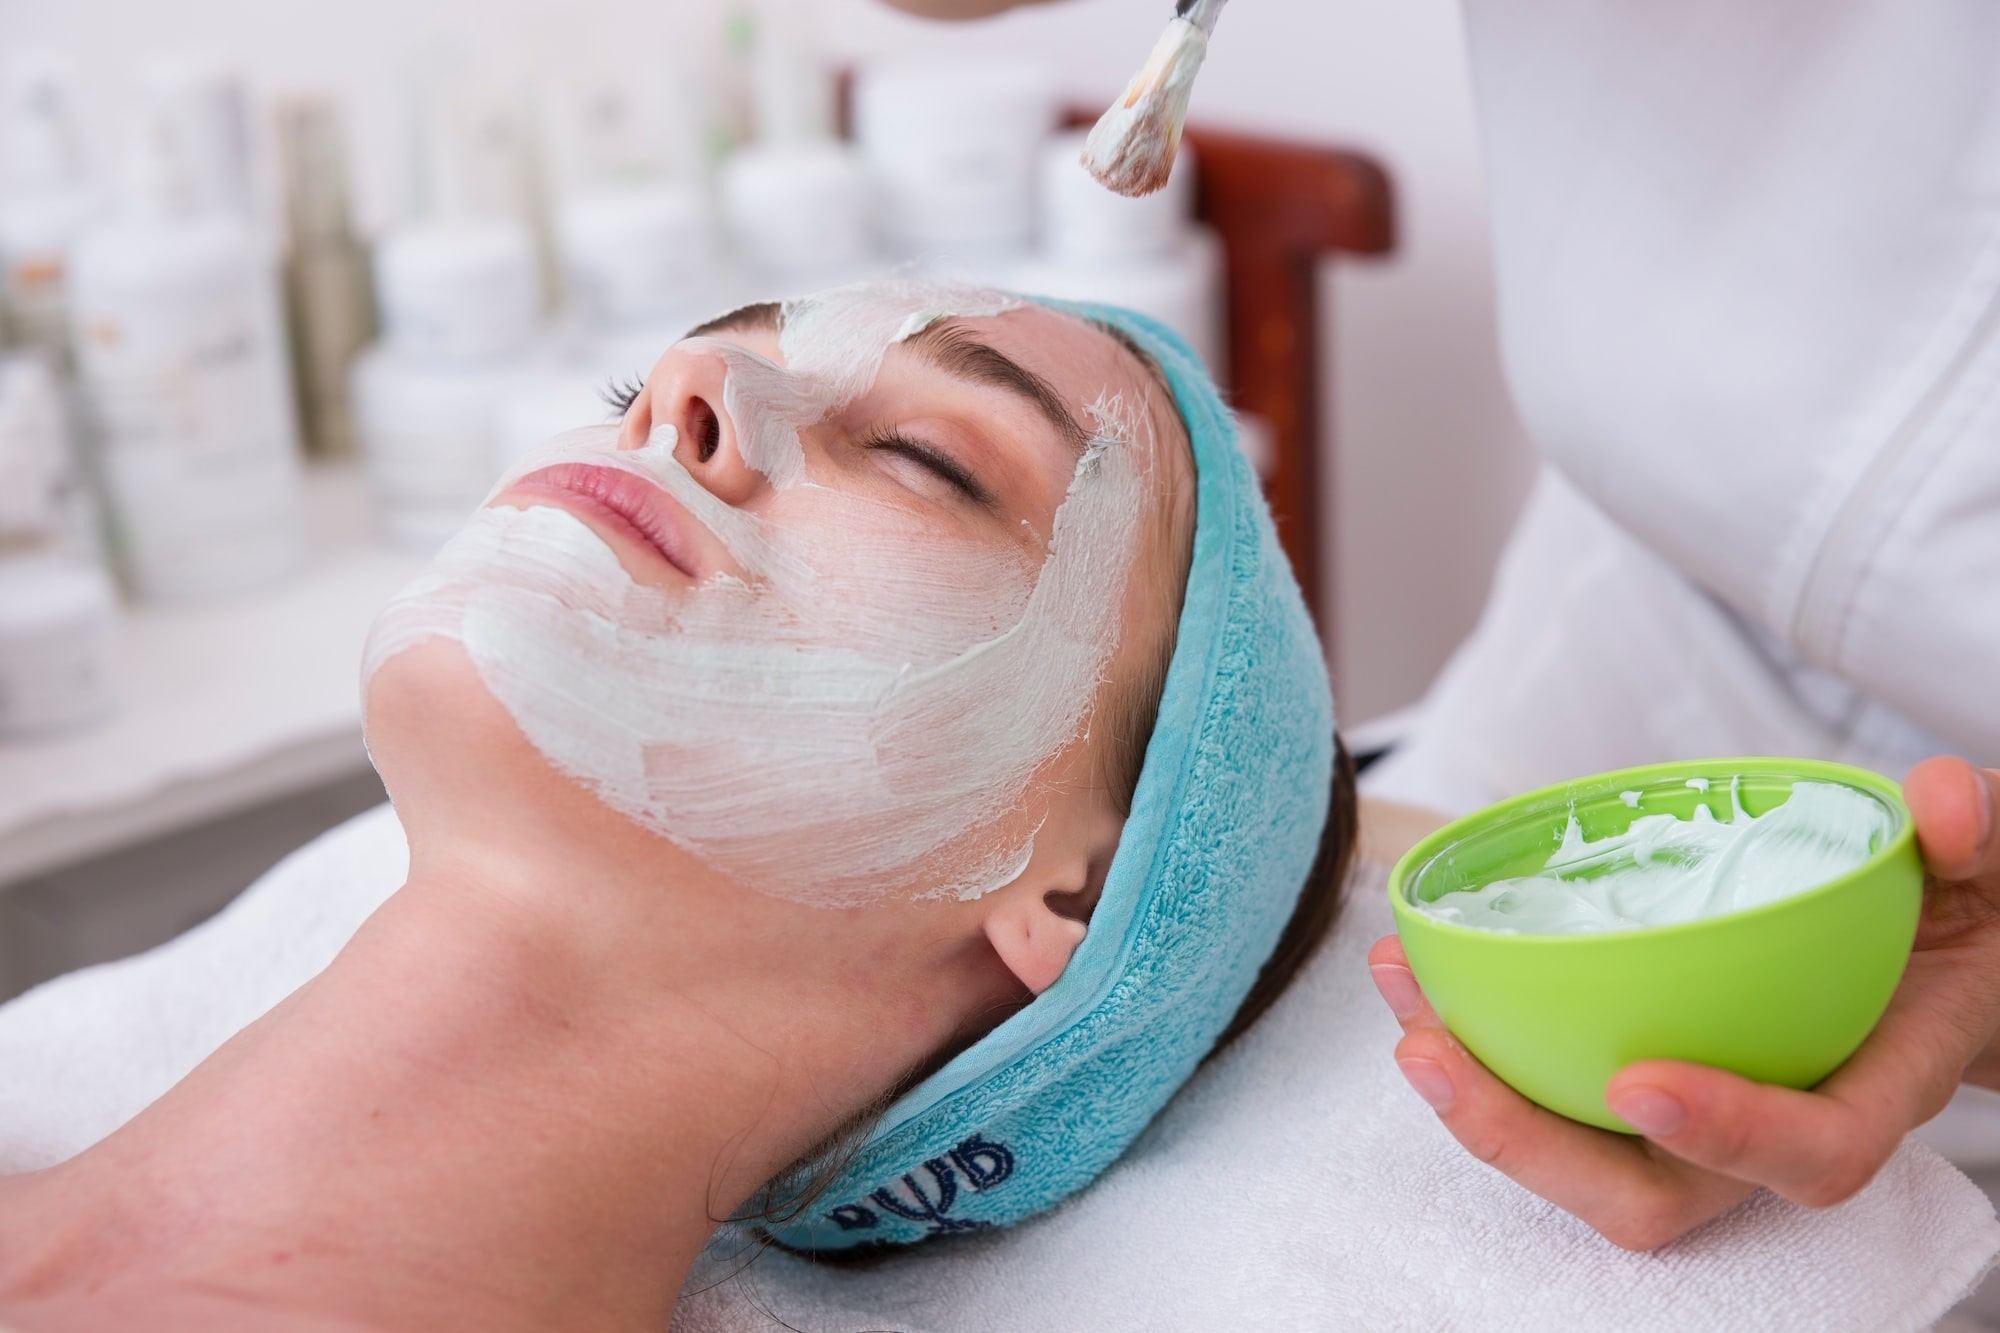 our express facial is 30 minuts, includes: cleanse,massage, mask, serums and moisturizer.$35